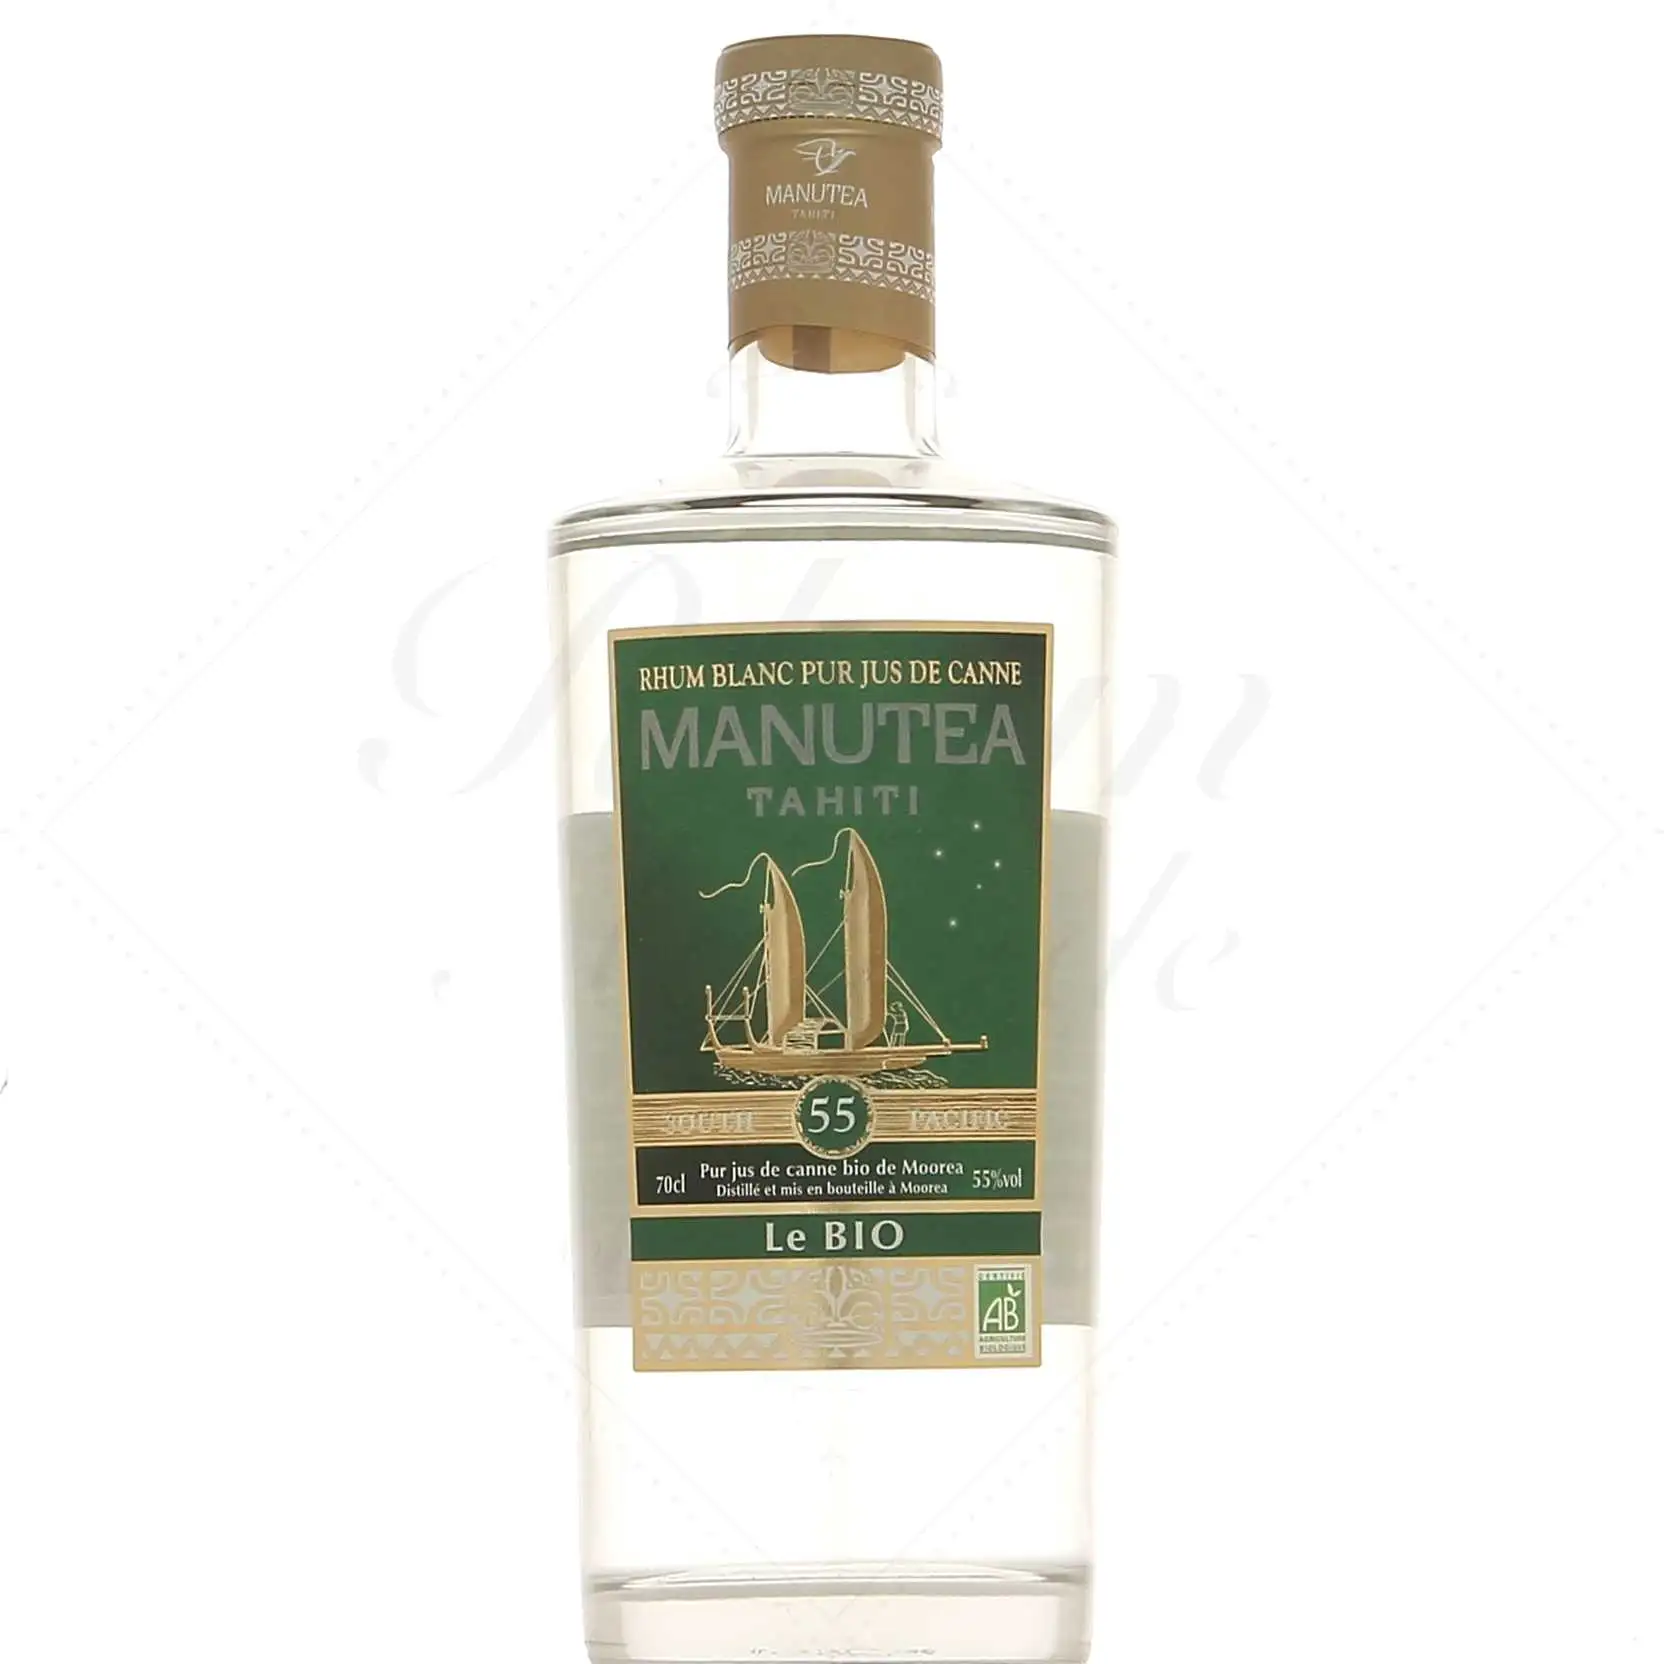 Image of the front of the bottle of the rum Le Bio